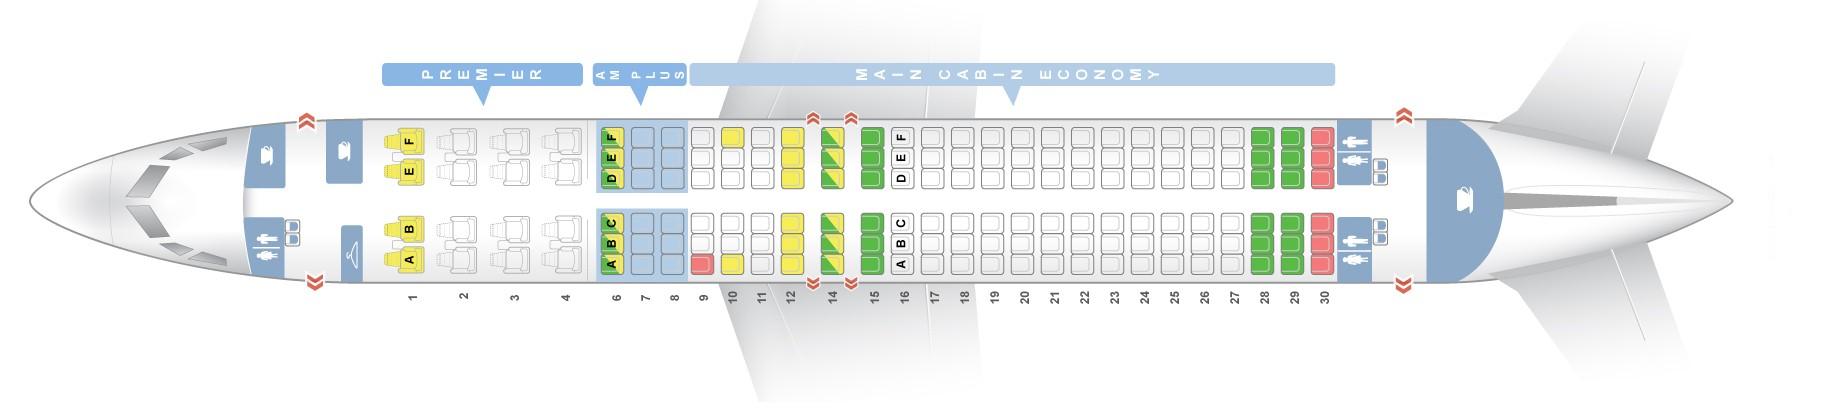 Seat map Boeing 737-800 Aeromexico. Best seats in the plane